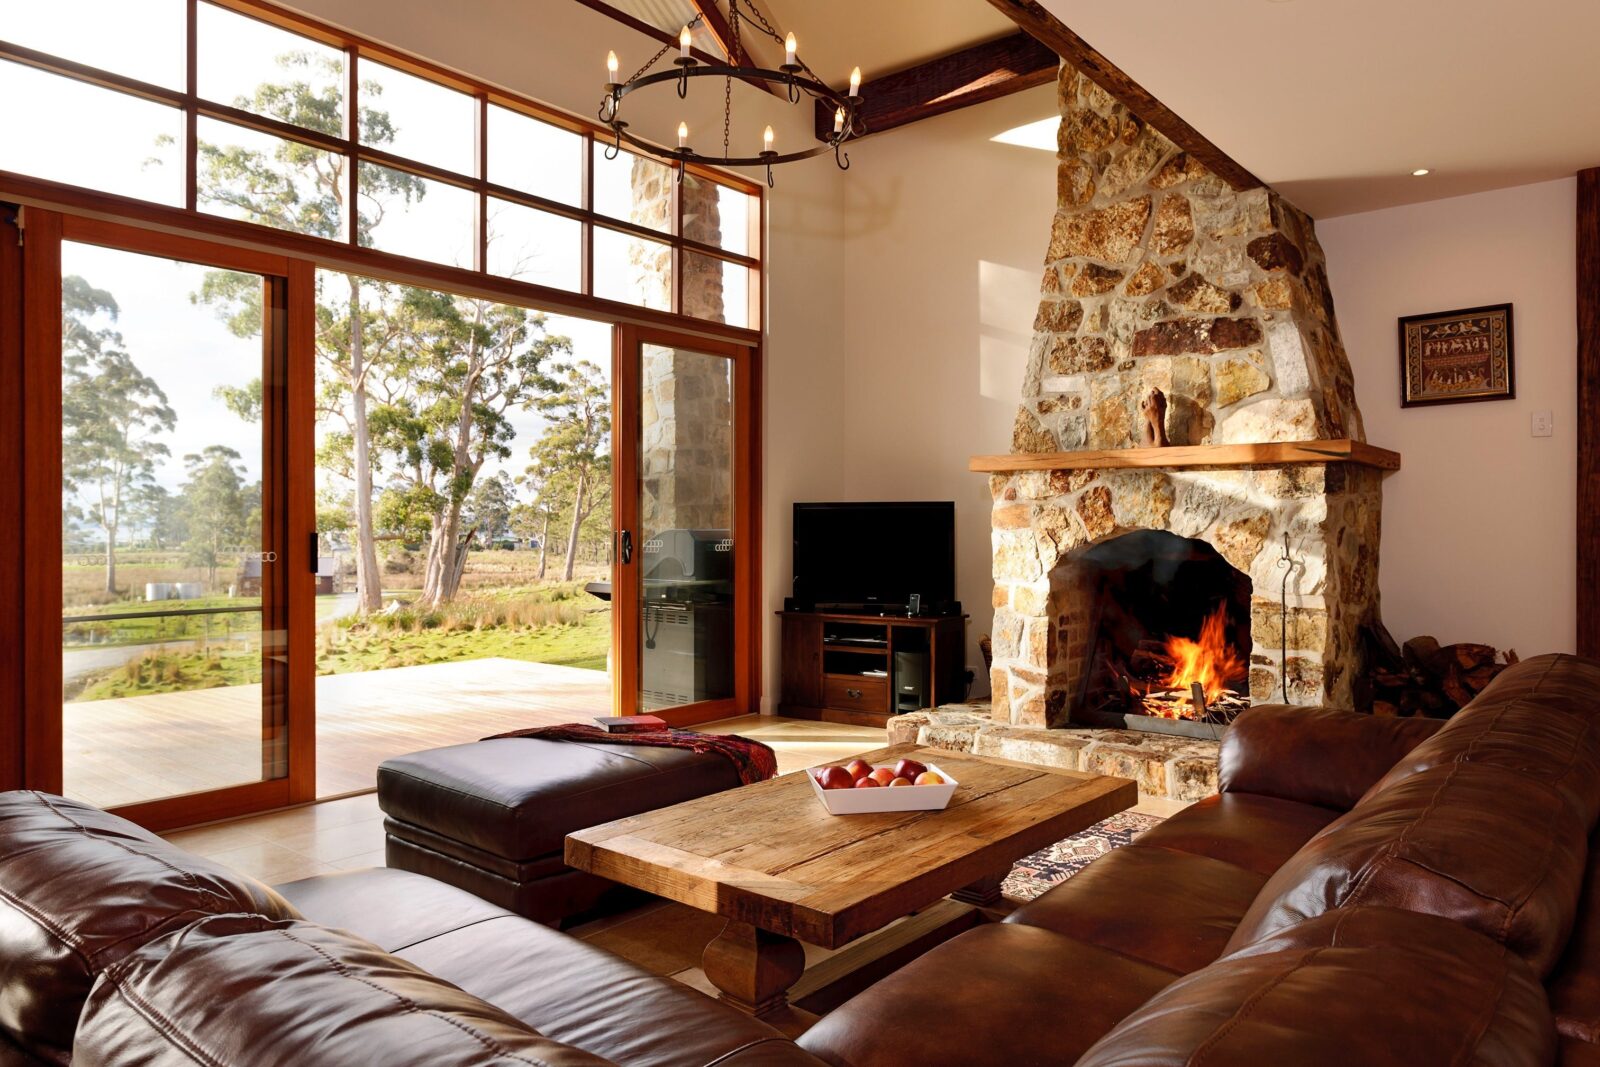 Deep leather lounges, wood fire and magnificent views across the property